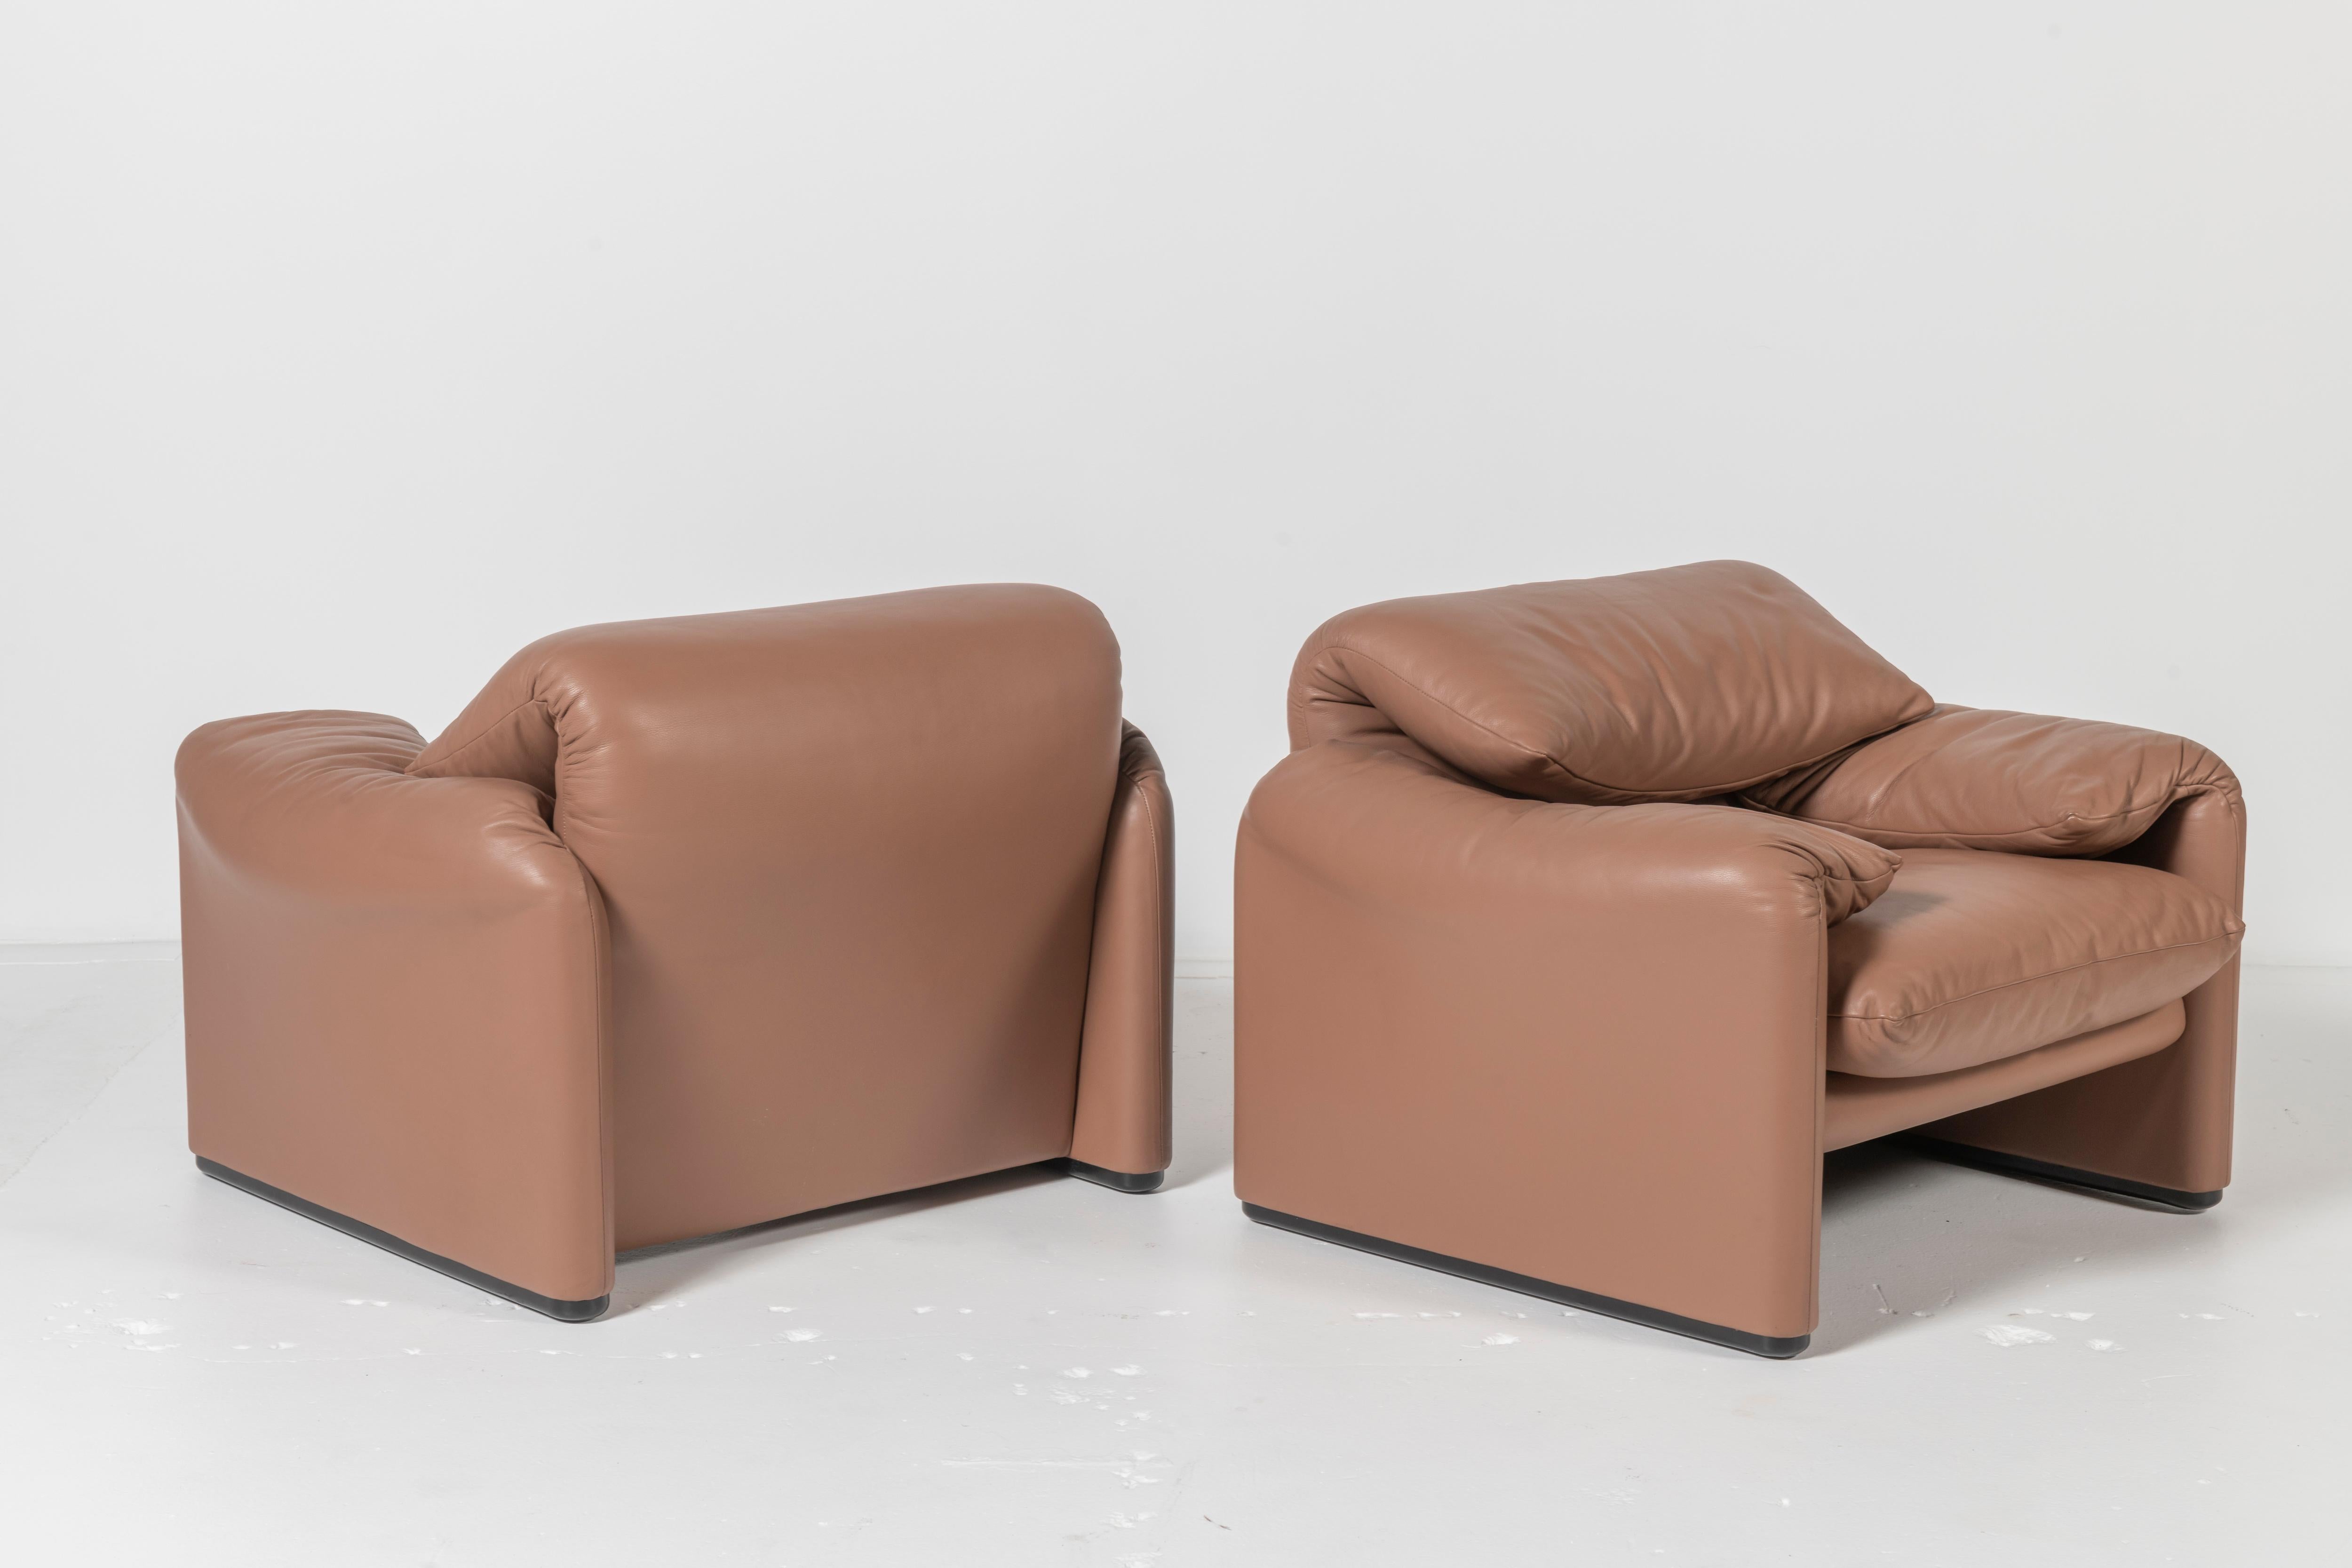 Pair of Maralunga Lounge Chairs with Ottoman in Tan Leather by Cassina 8